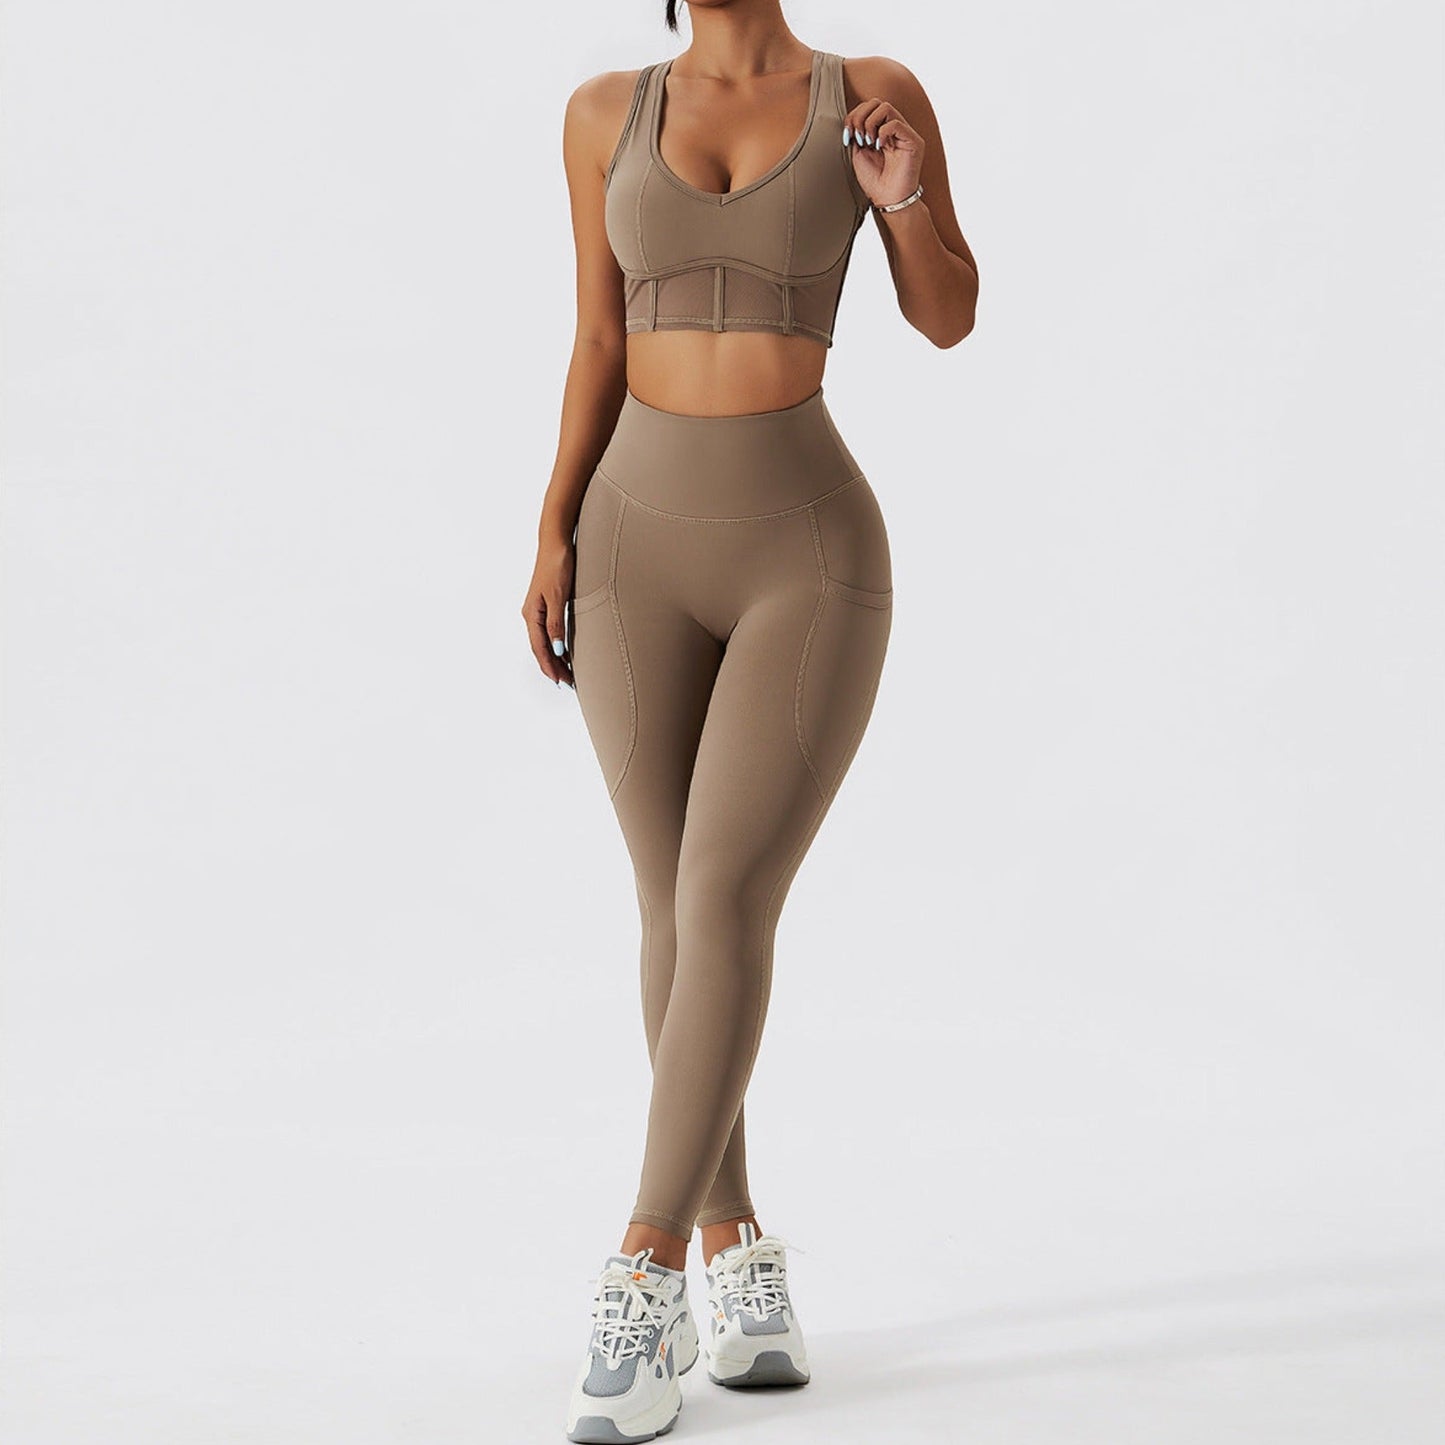 Fitness model wearing a tan matching set from Vibras Activewear.